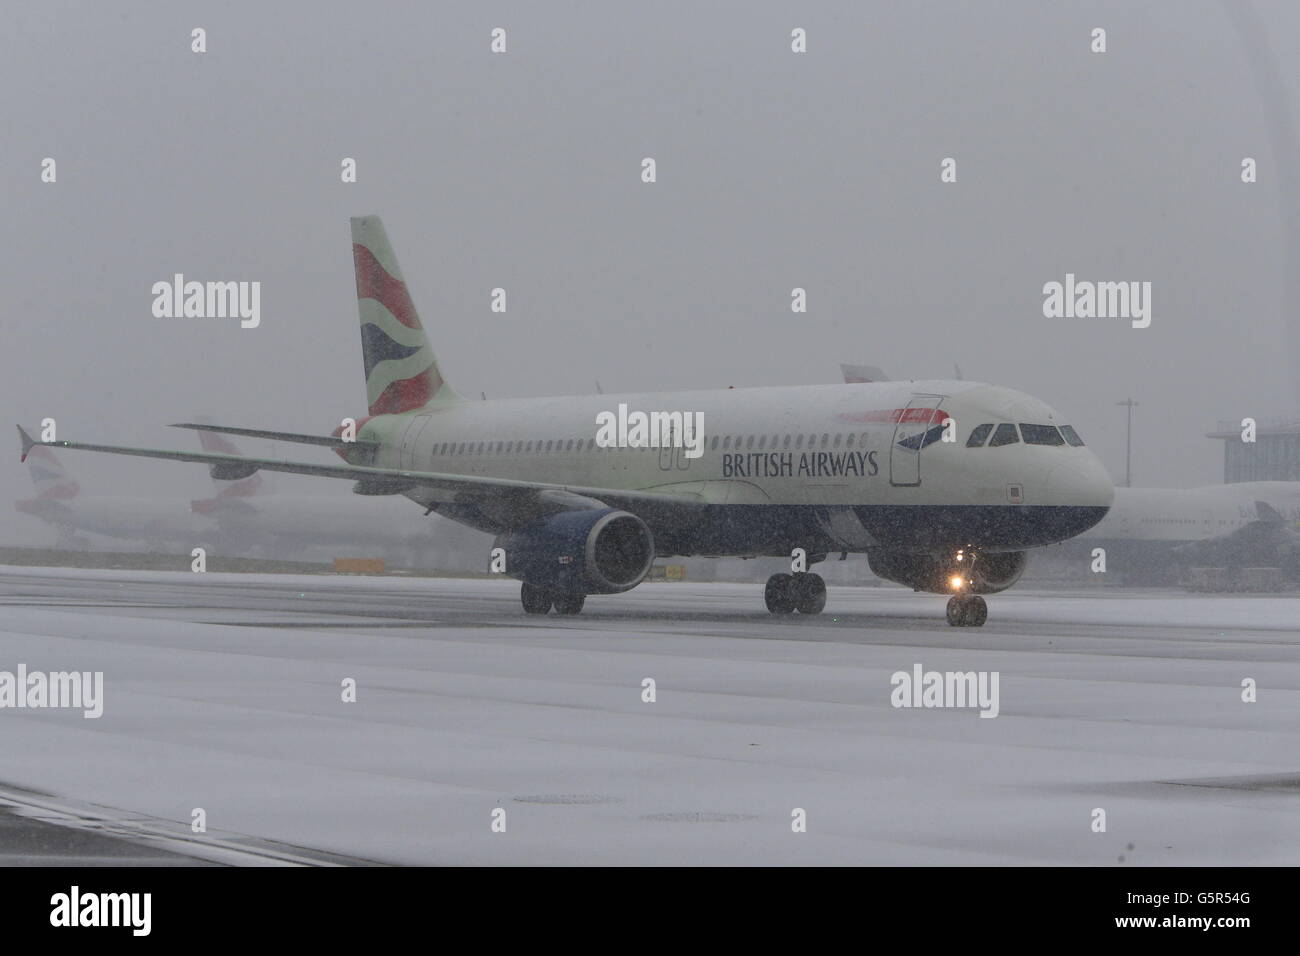 A plane sits on the runway at Heathrow airport, as snow shut roads and disrupted train travel today across the UK, with the major commuter belt areas of southern England escaping the worst of the morning hazards. Stock Photo